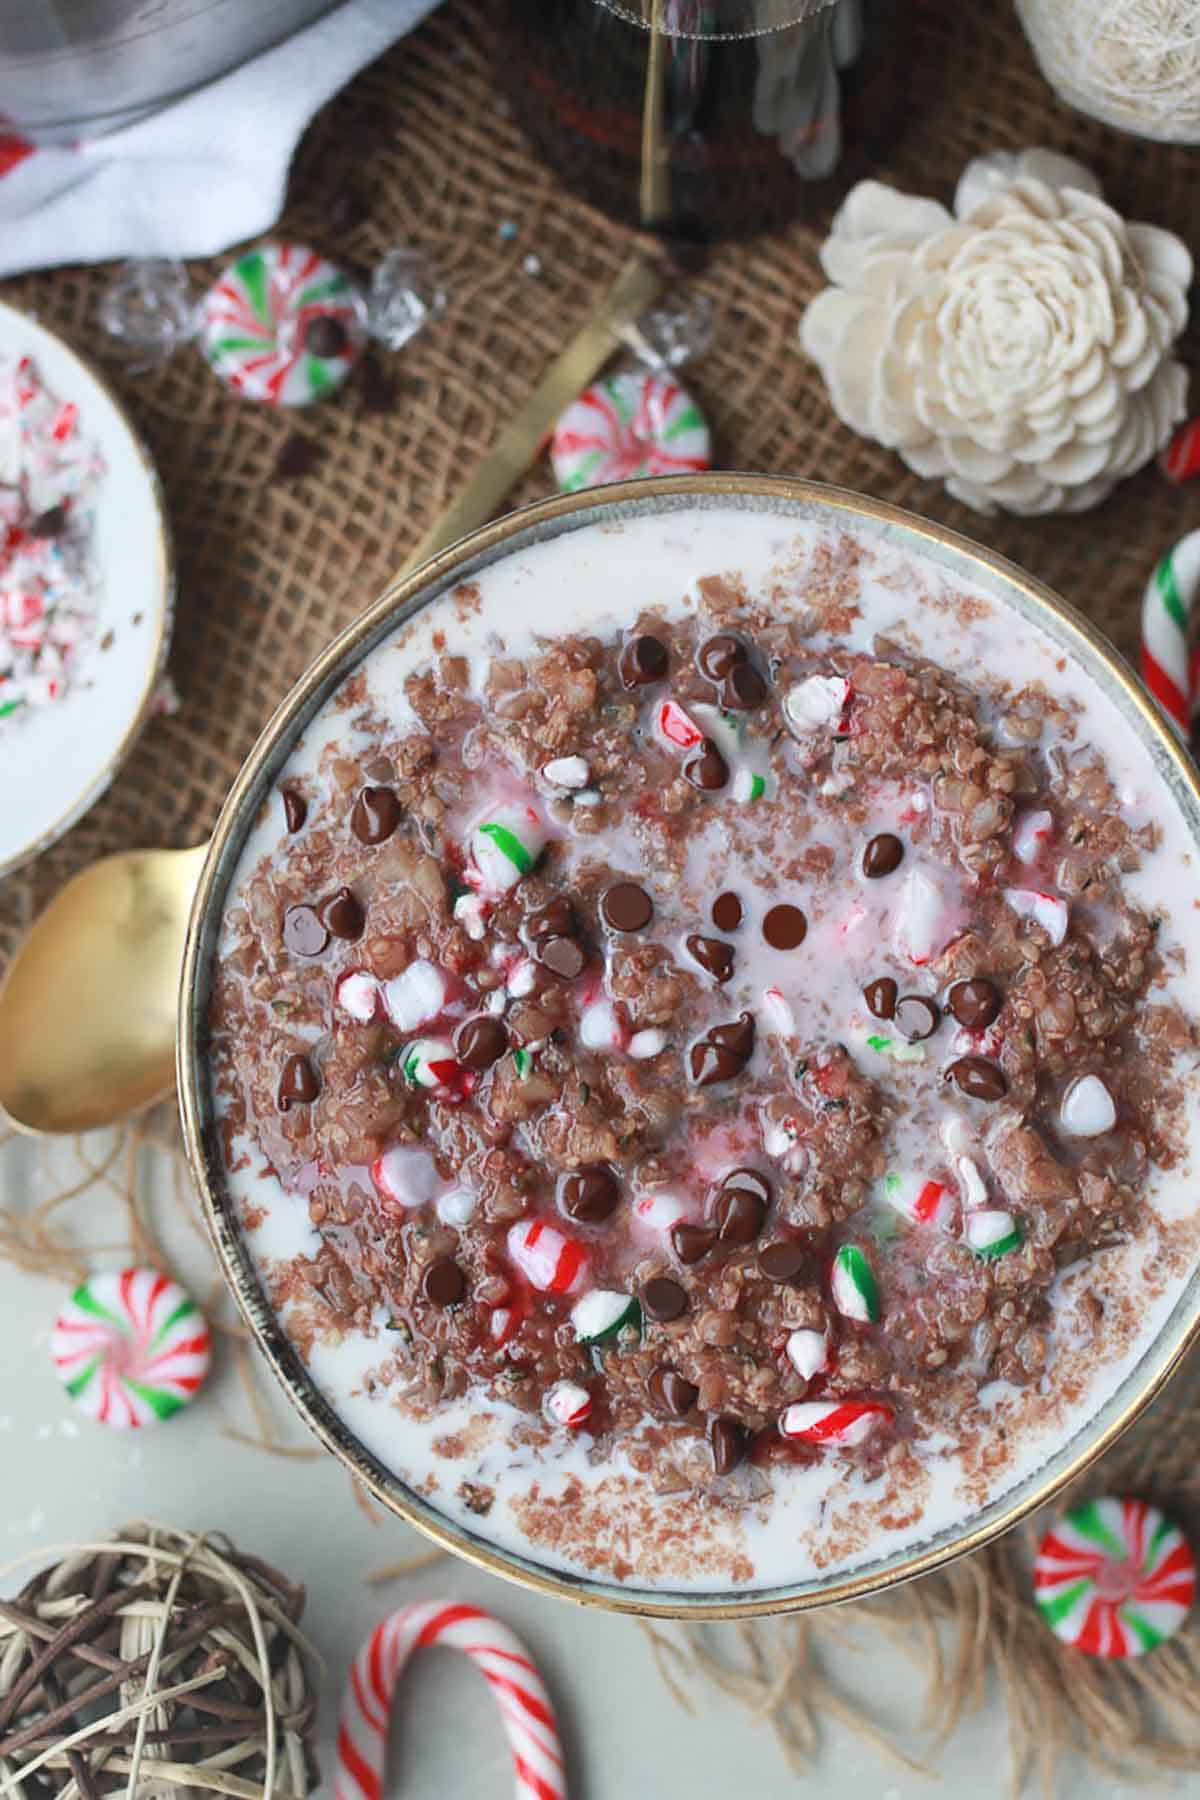 Birds eye view of protein porridge oats with peppermint surrounded by candy canes.